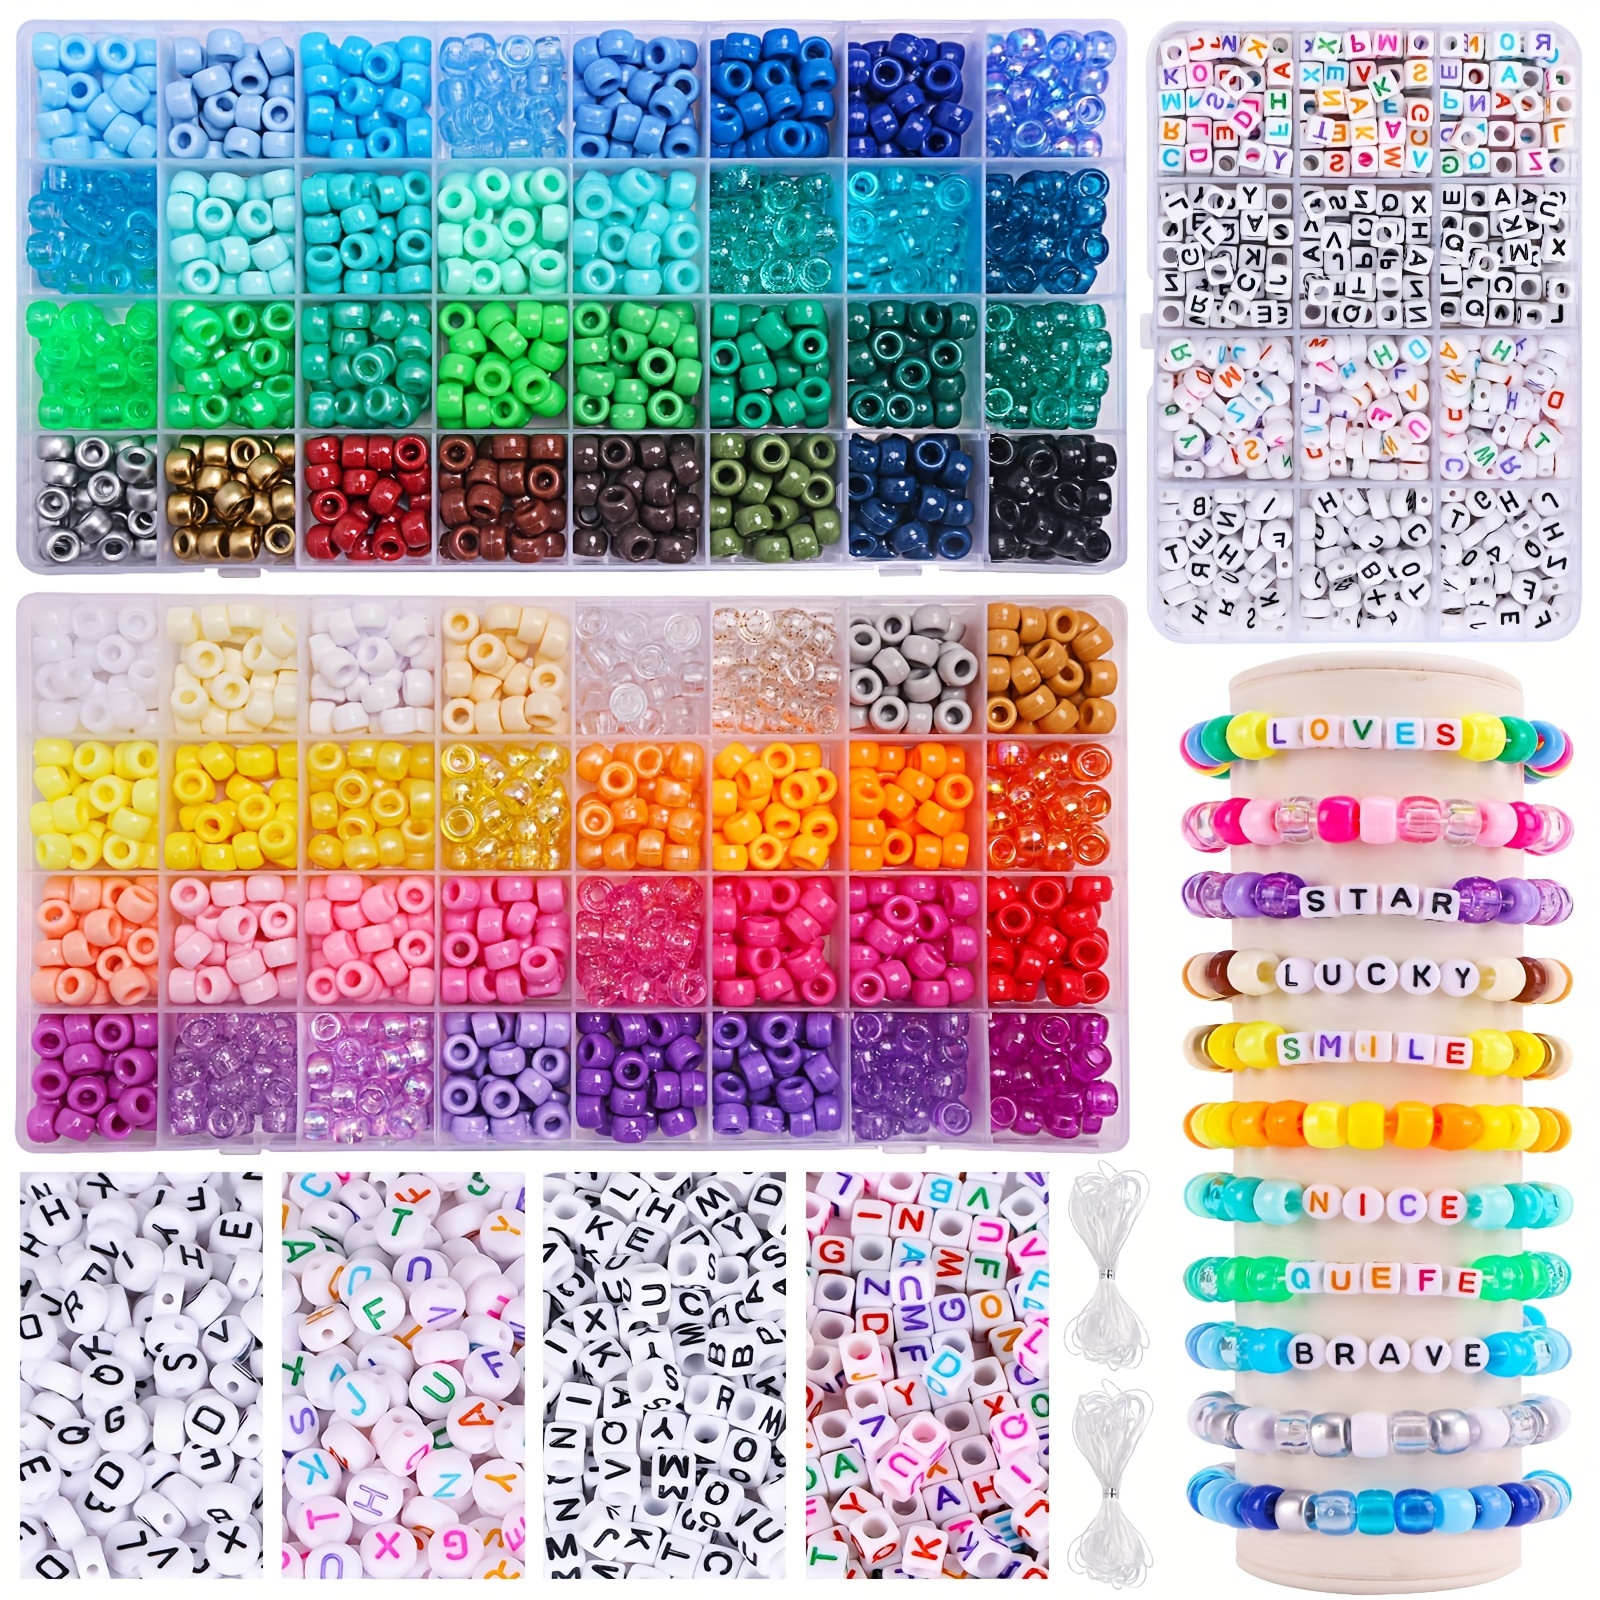  QUEFE Clay Beads Kit, 16800pcs, 168 Colors, Polymer Heishi Beads,  Clay Bead Bracelet Kit, Charm Set Jewelry Making, DIY Craft Gifts : Arts,  Crafts & Sewing